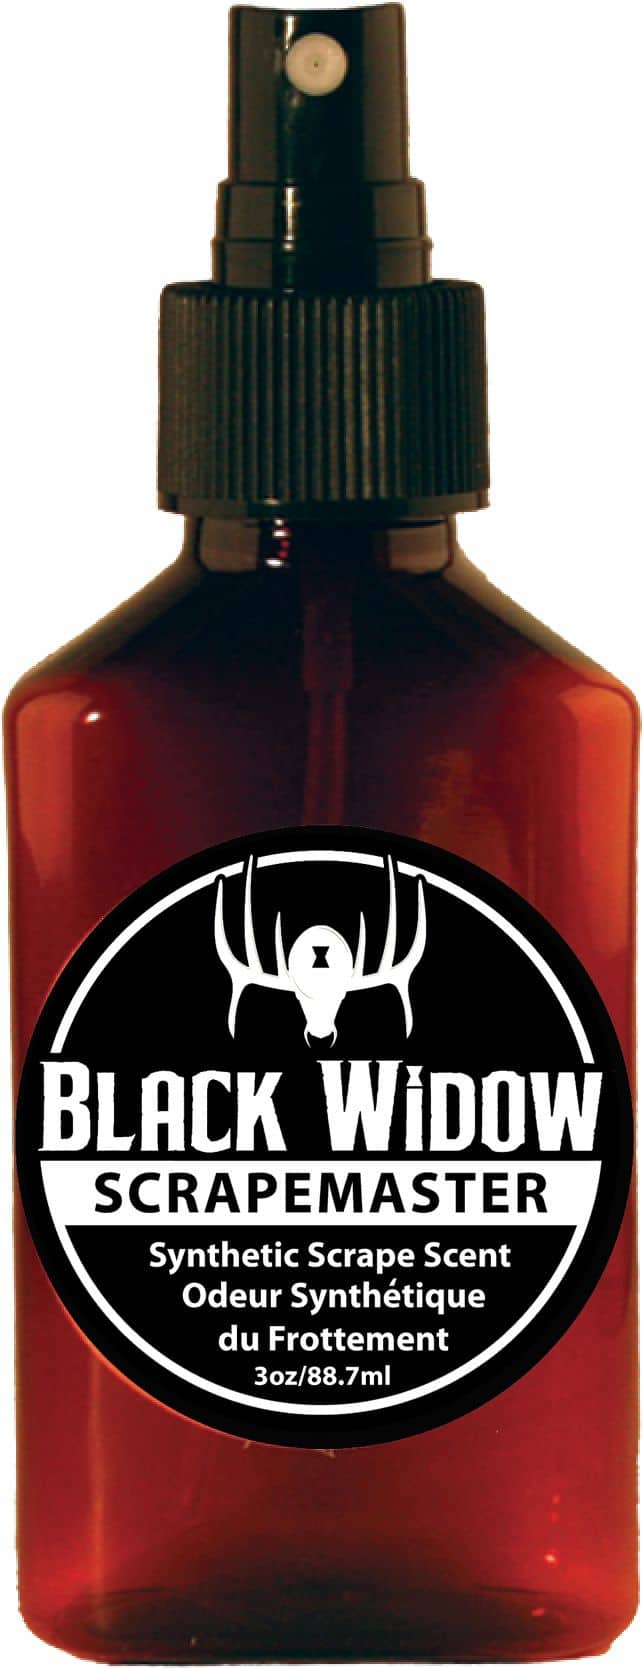 Black Widow Synthetic Scrape Master Deer Hunting Lure/Attractant, 3-oz